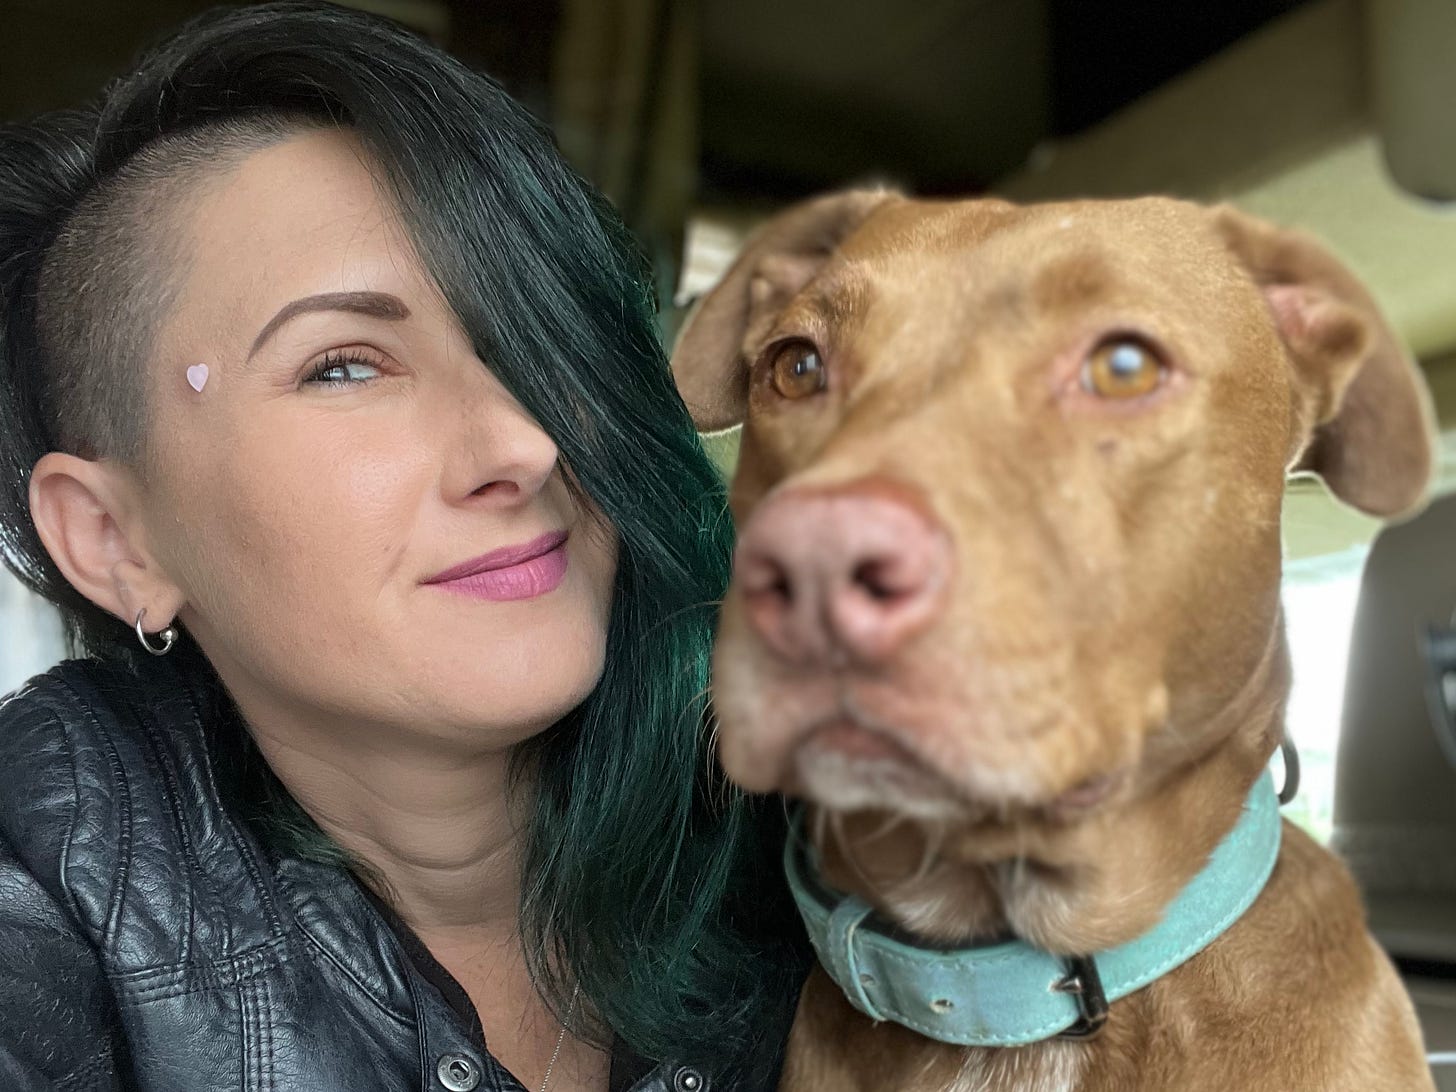 Lyric, with long green and black hair, wearing a black leather jacket and posing with their friend Sadie, the pit bull, who is reddish brown in color and wearing a teal collar.